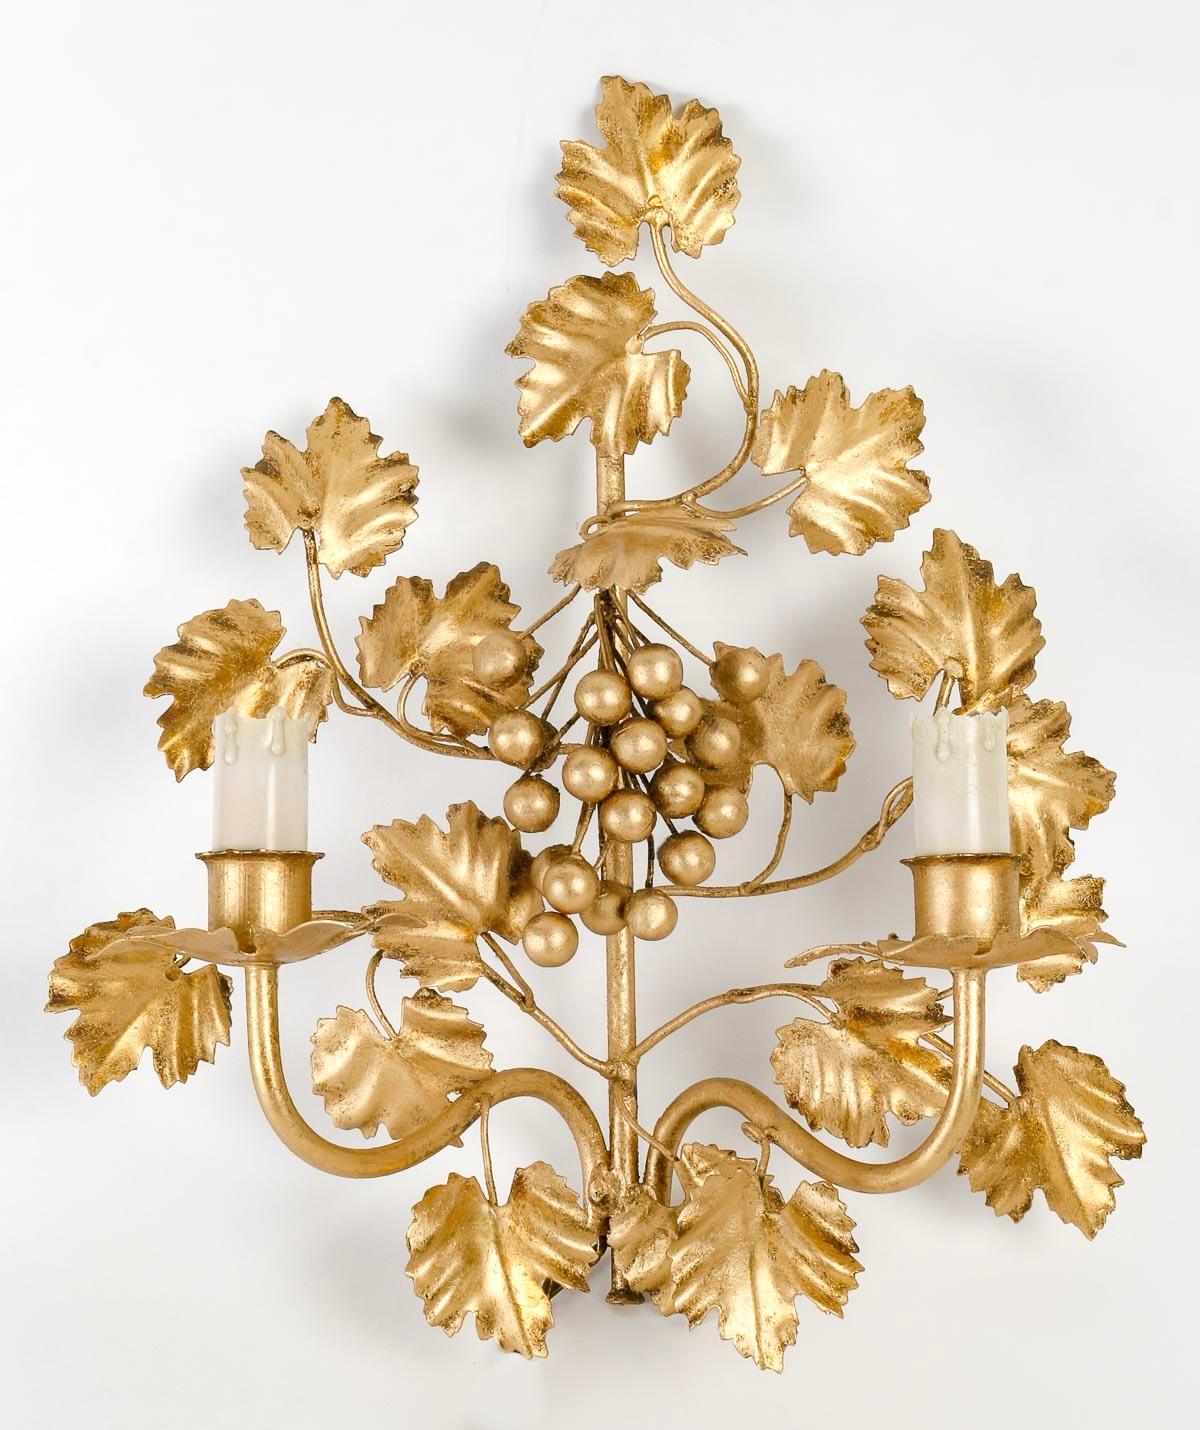 Pair of grapevine sconces by FlorArt.

Composed of a large grape leaf motif surrounding a cluster of grapes.
Two ascending arms of light on either side of the sconce are adorned with luminous candles, highlighted at the base by petal-decorated